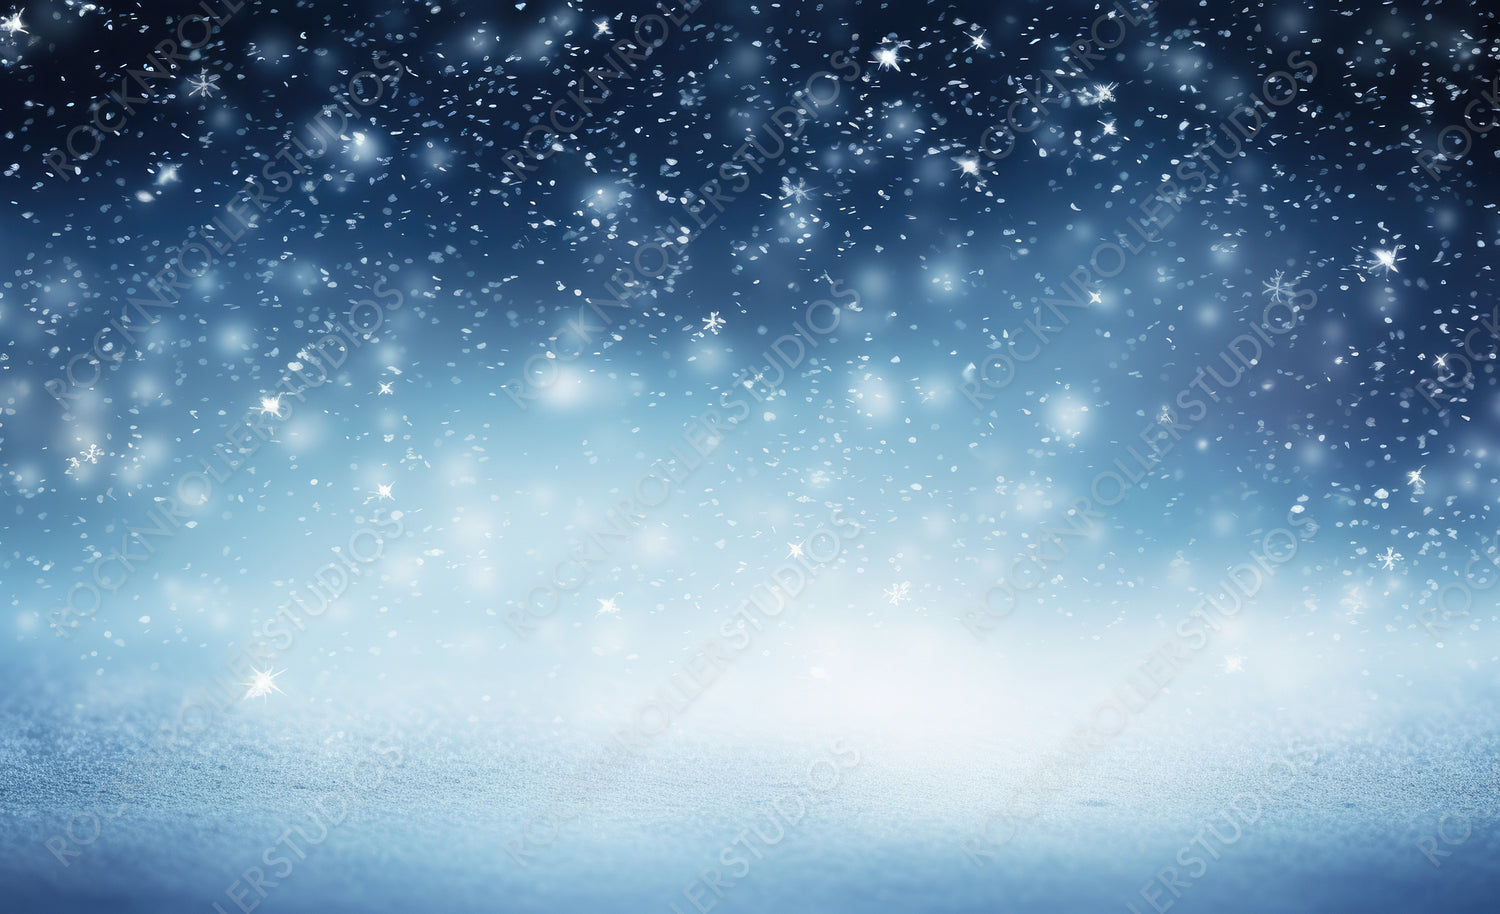 Winter background - sparkling falling snow against a dark blue sky and white snowdrifts.